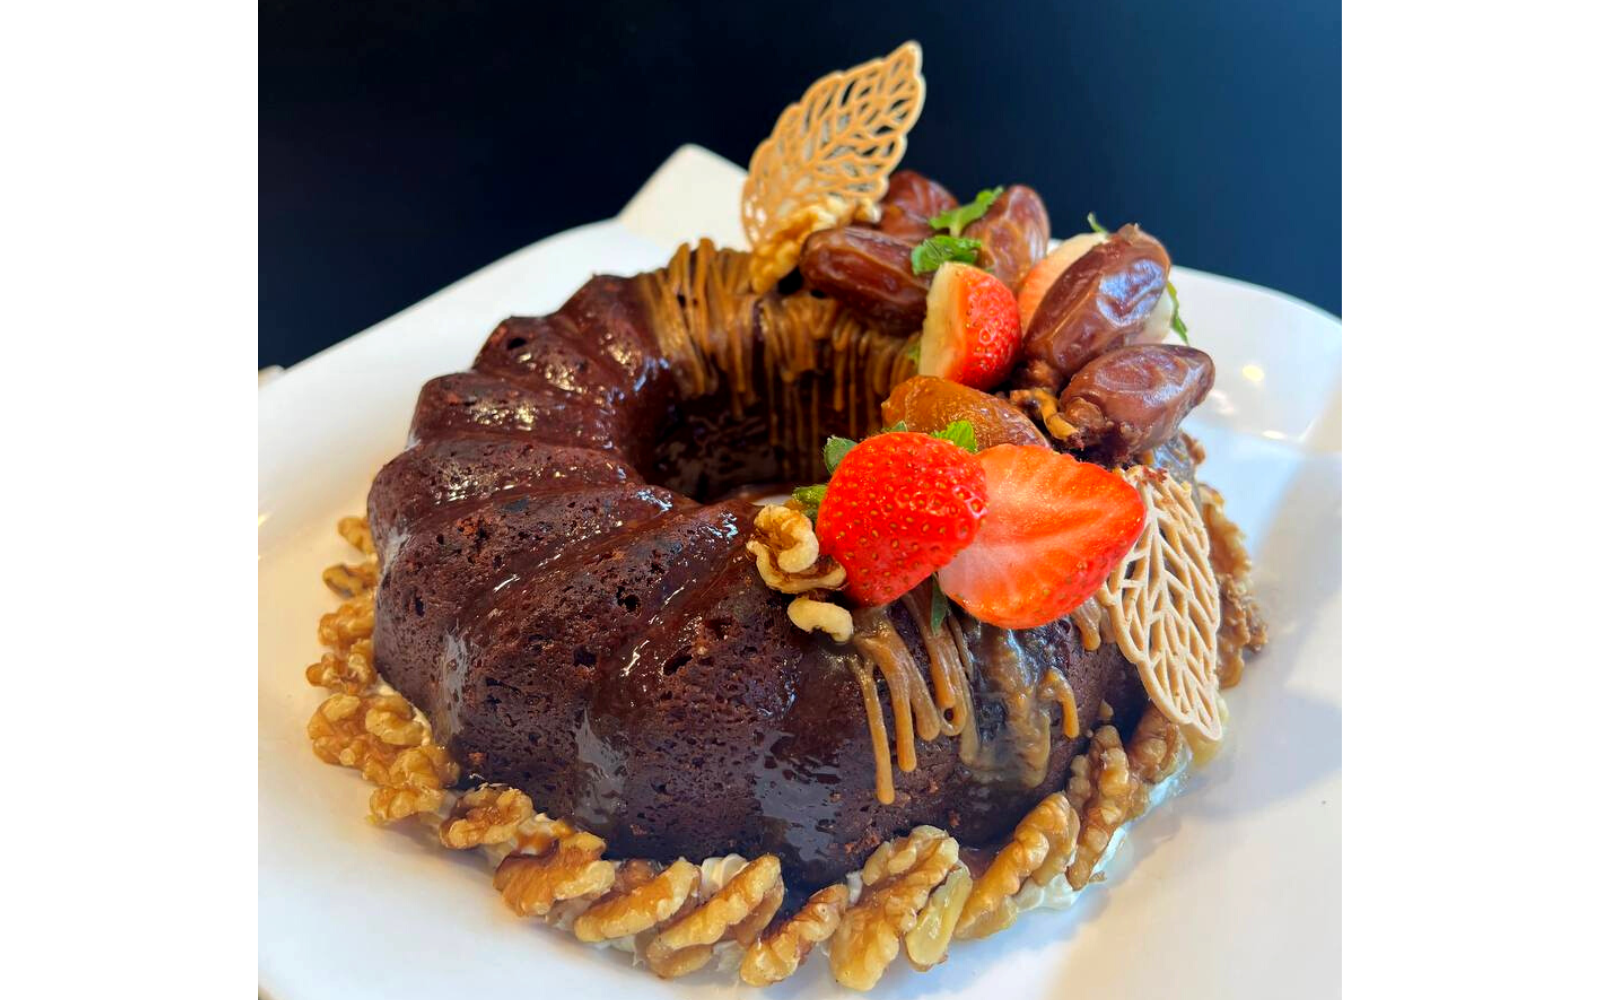 Divinely moist cake infused with the rich, robust flavor of premium Ajwa dates imported straight from the heart of the Middle East, topped with our secret recipe of indulgent, homemade salted caramel. Sticky Date Cake with Salted Caramel